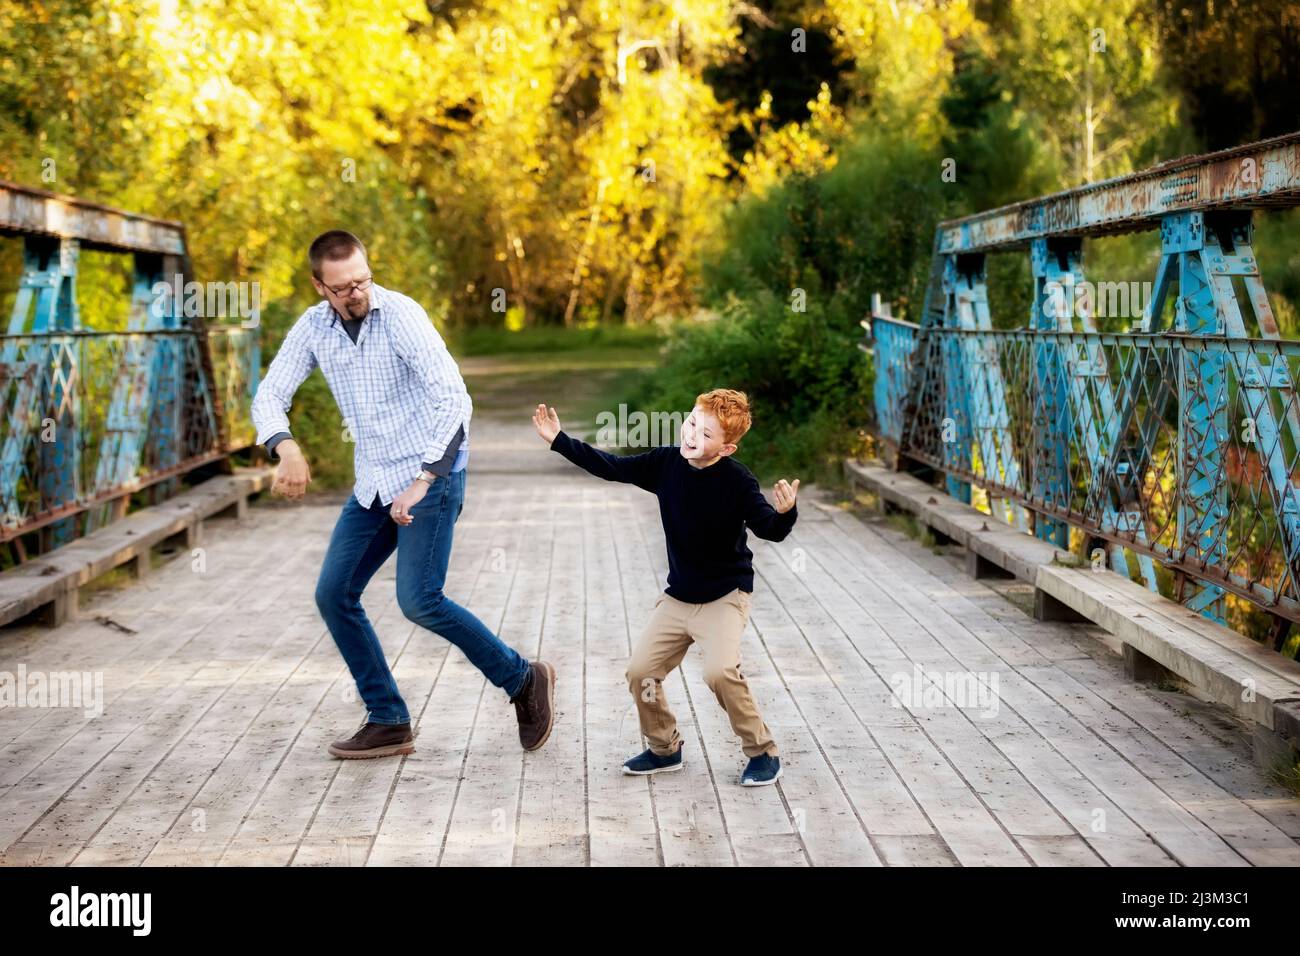 Father and son doing dance moves on a bridge in a park in autumn; Edmonton, Alberta, Canada Stock Photo